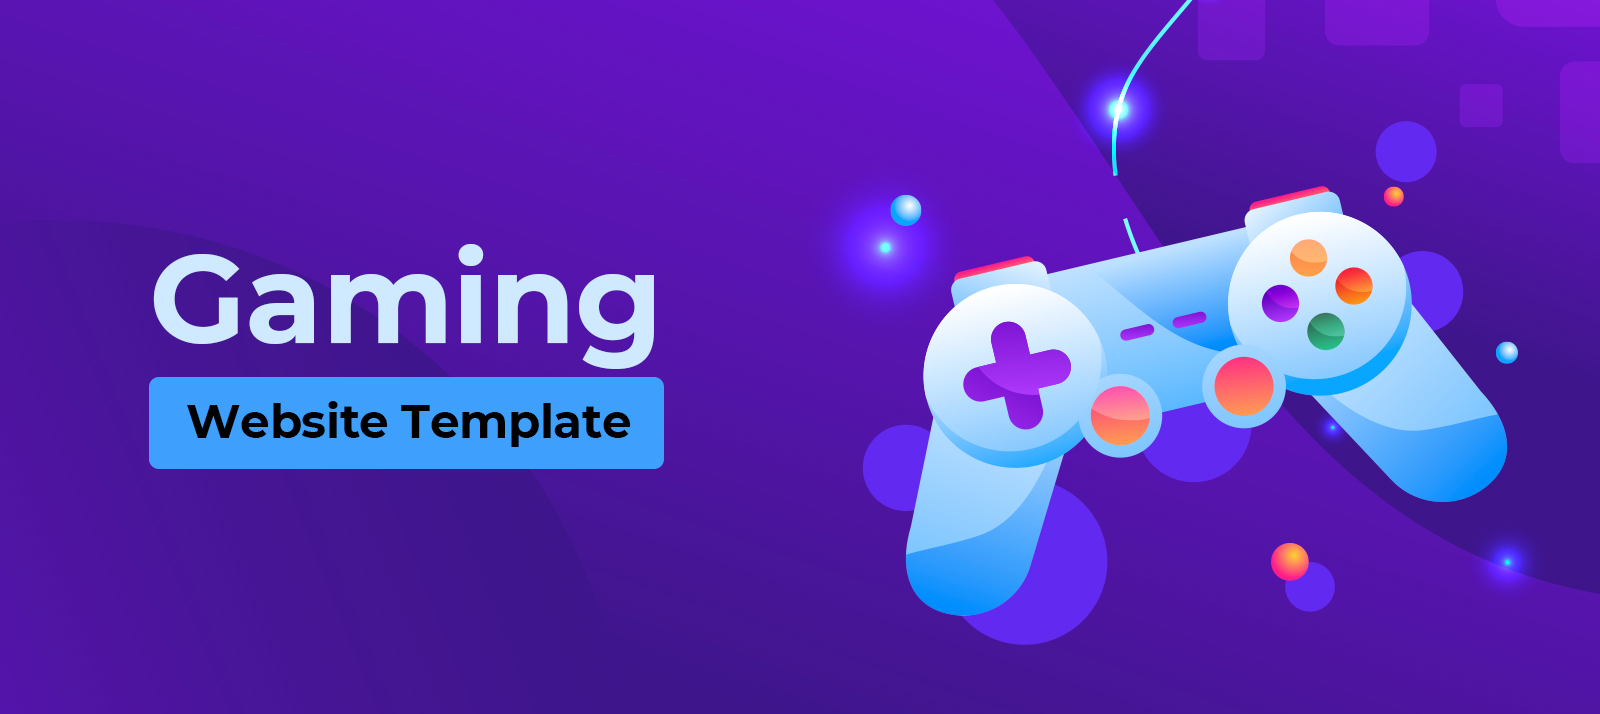 New and Trending Gaming Website Templates BootstrapDash